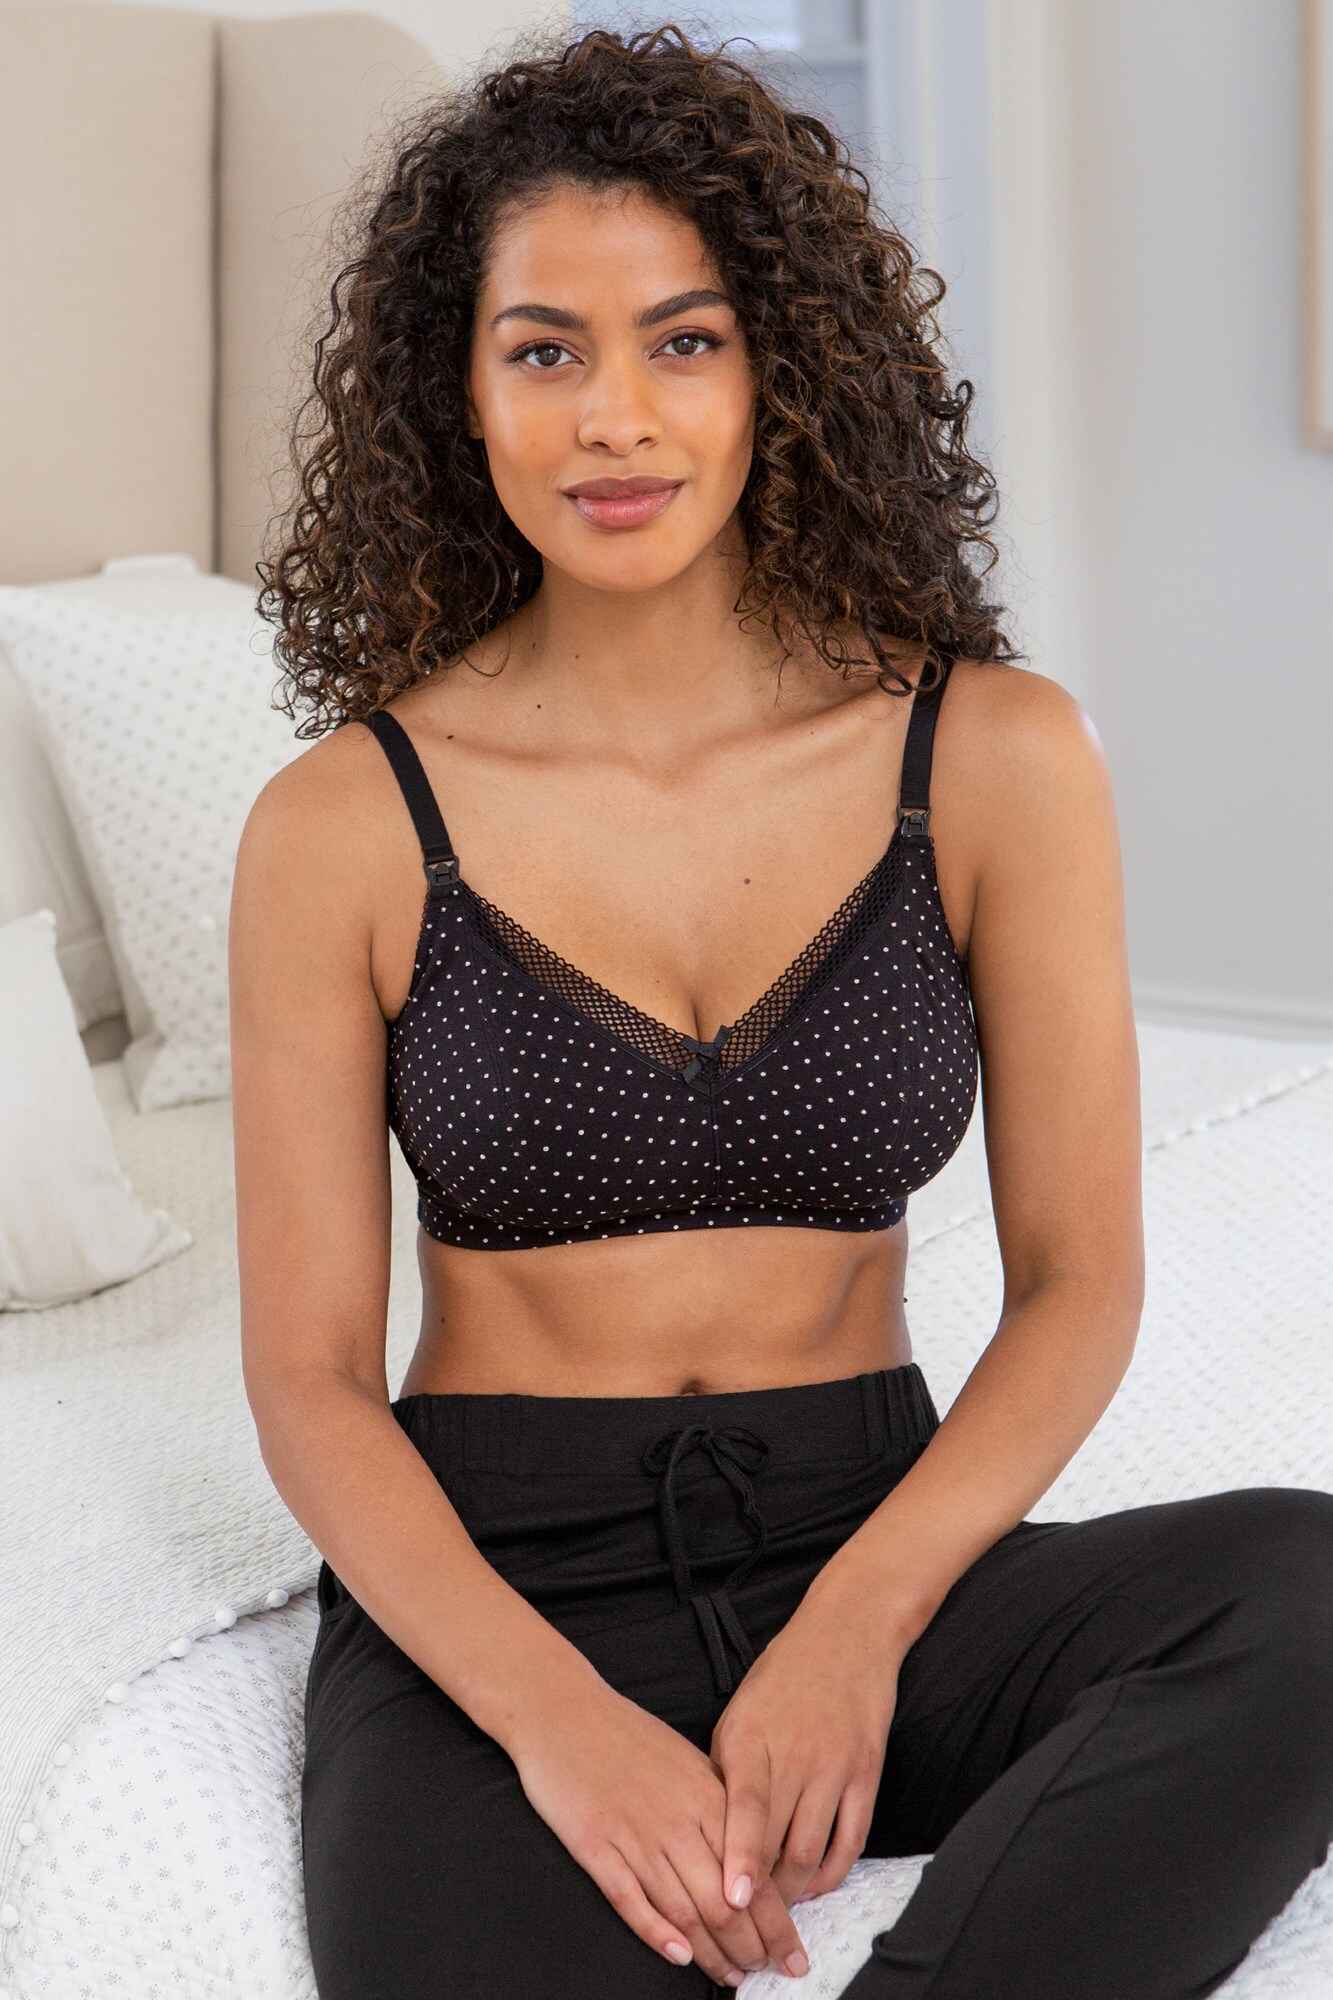 The Pencil Test - Looking for a maternity bra that is more fun and stylish,  but with functional comfort? The Love To Lounge Cotton Nursing Bra by Pour  Moi has great features!